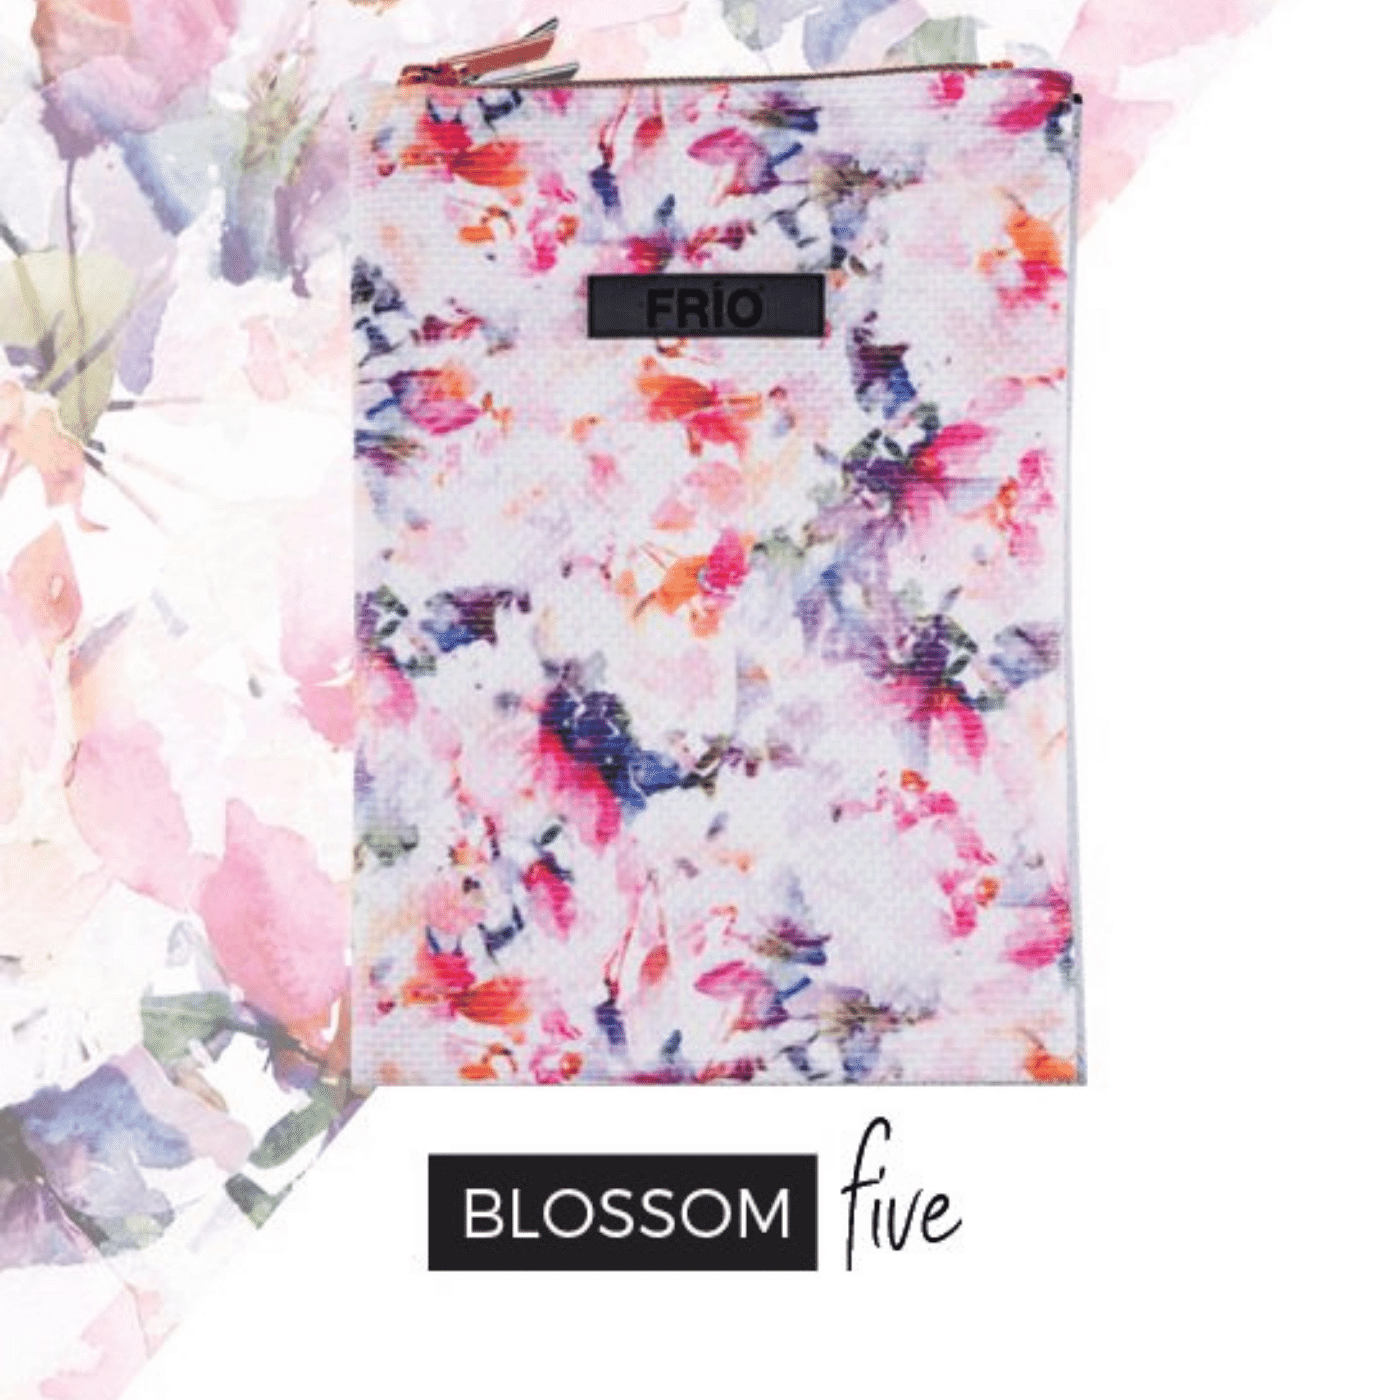 Frio Five Cooling Wallet Blossom||Frio Five Cooling Wallet Blossom|Frio Five Cooling Wallet Blossom|Frio Five Cooling Wallet Blossom